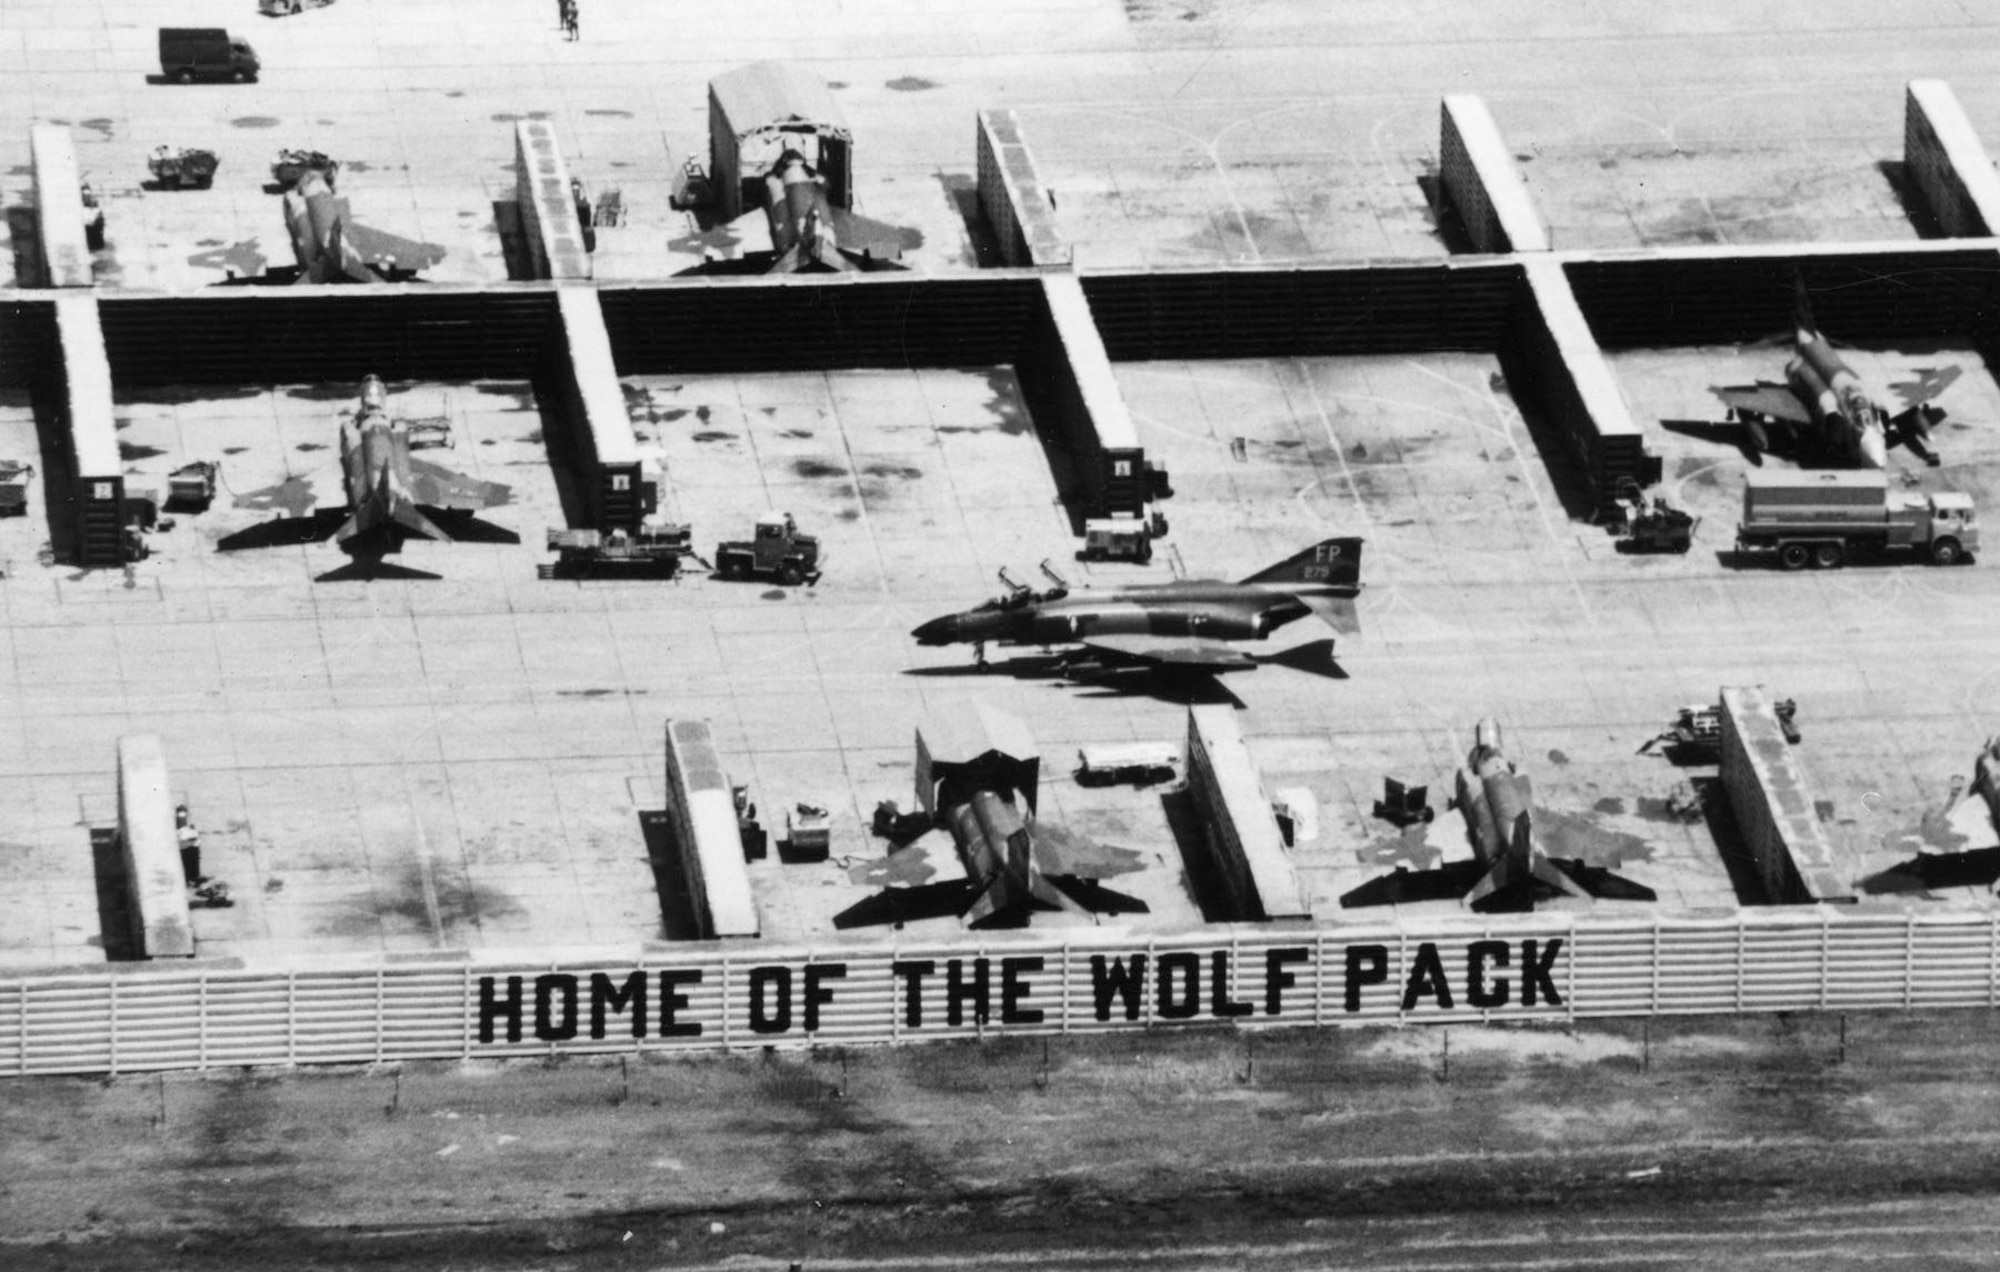 The nickname of the 8th Tactical Fighter Wing -- the “Wolfpack” -- fit Robin Olds’ aggressive style. Pictured here are revetments and F-4s of the 8th TFW at Ubon, Thailand. (U.S. Air Force photo)